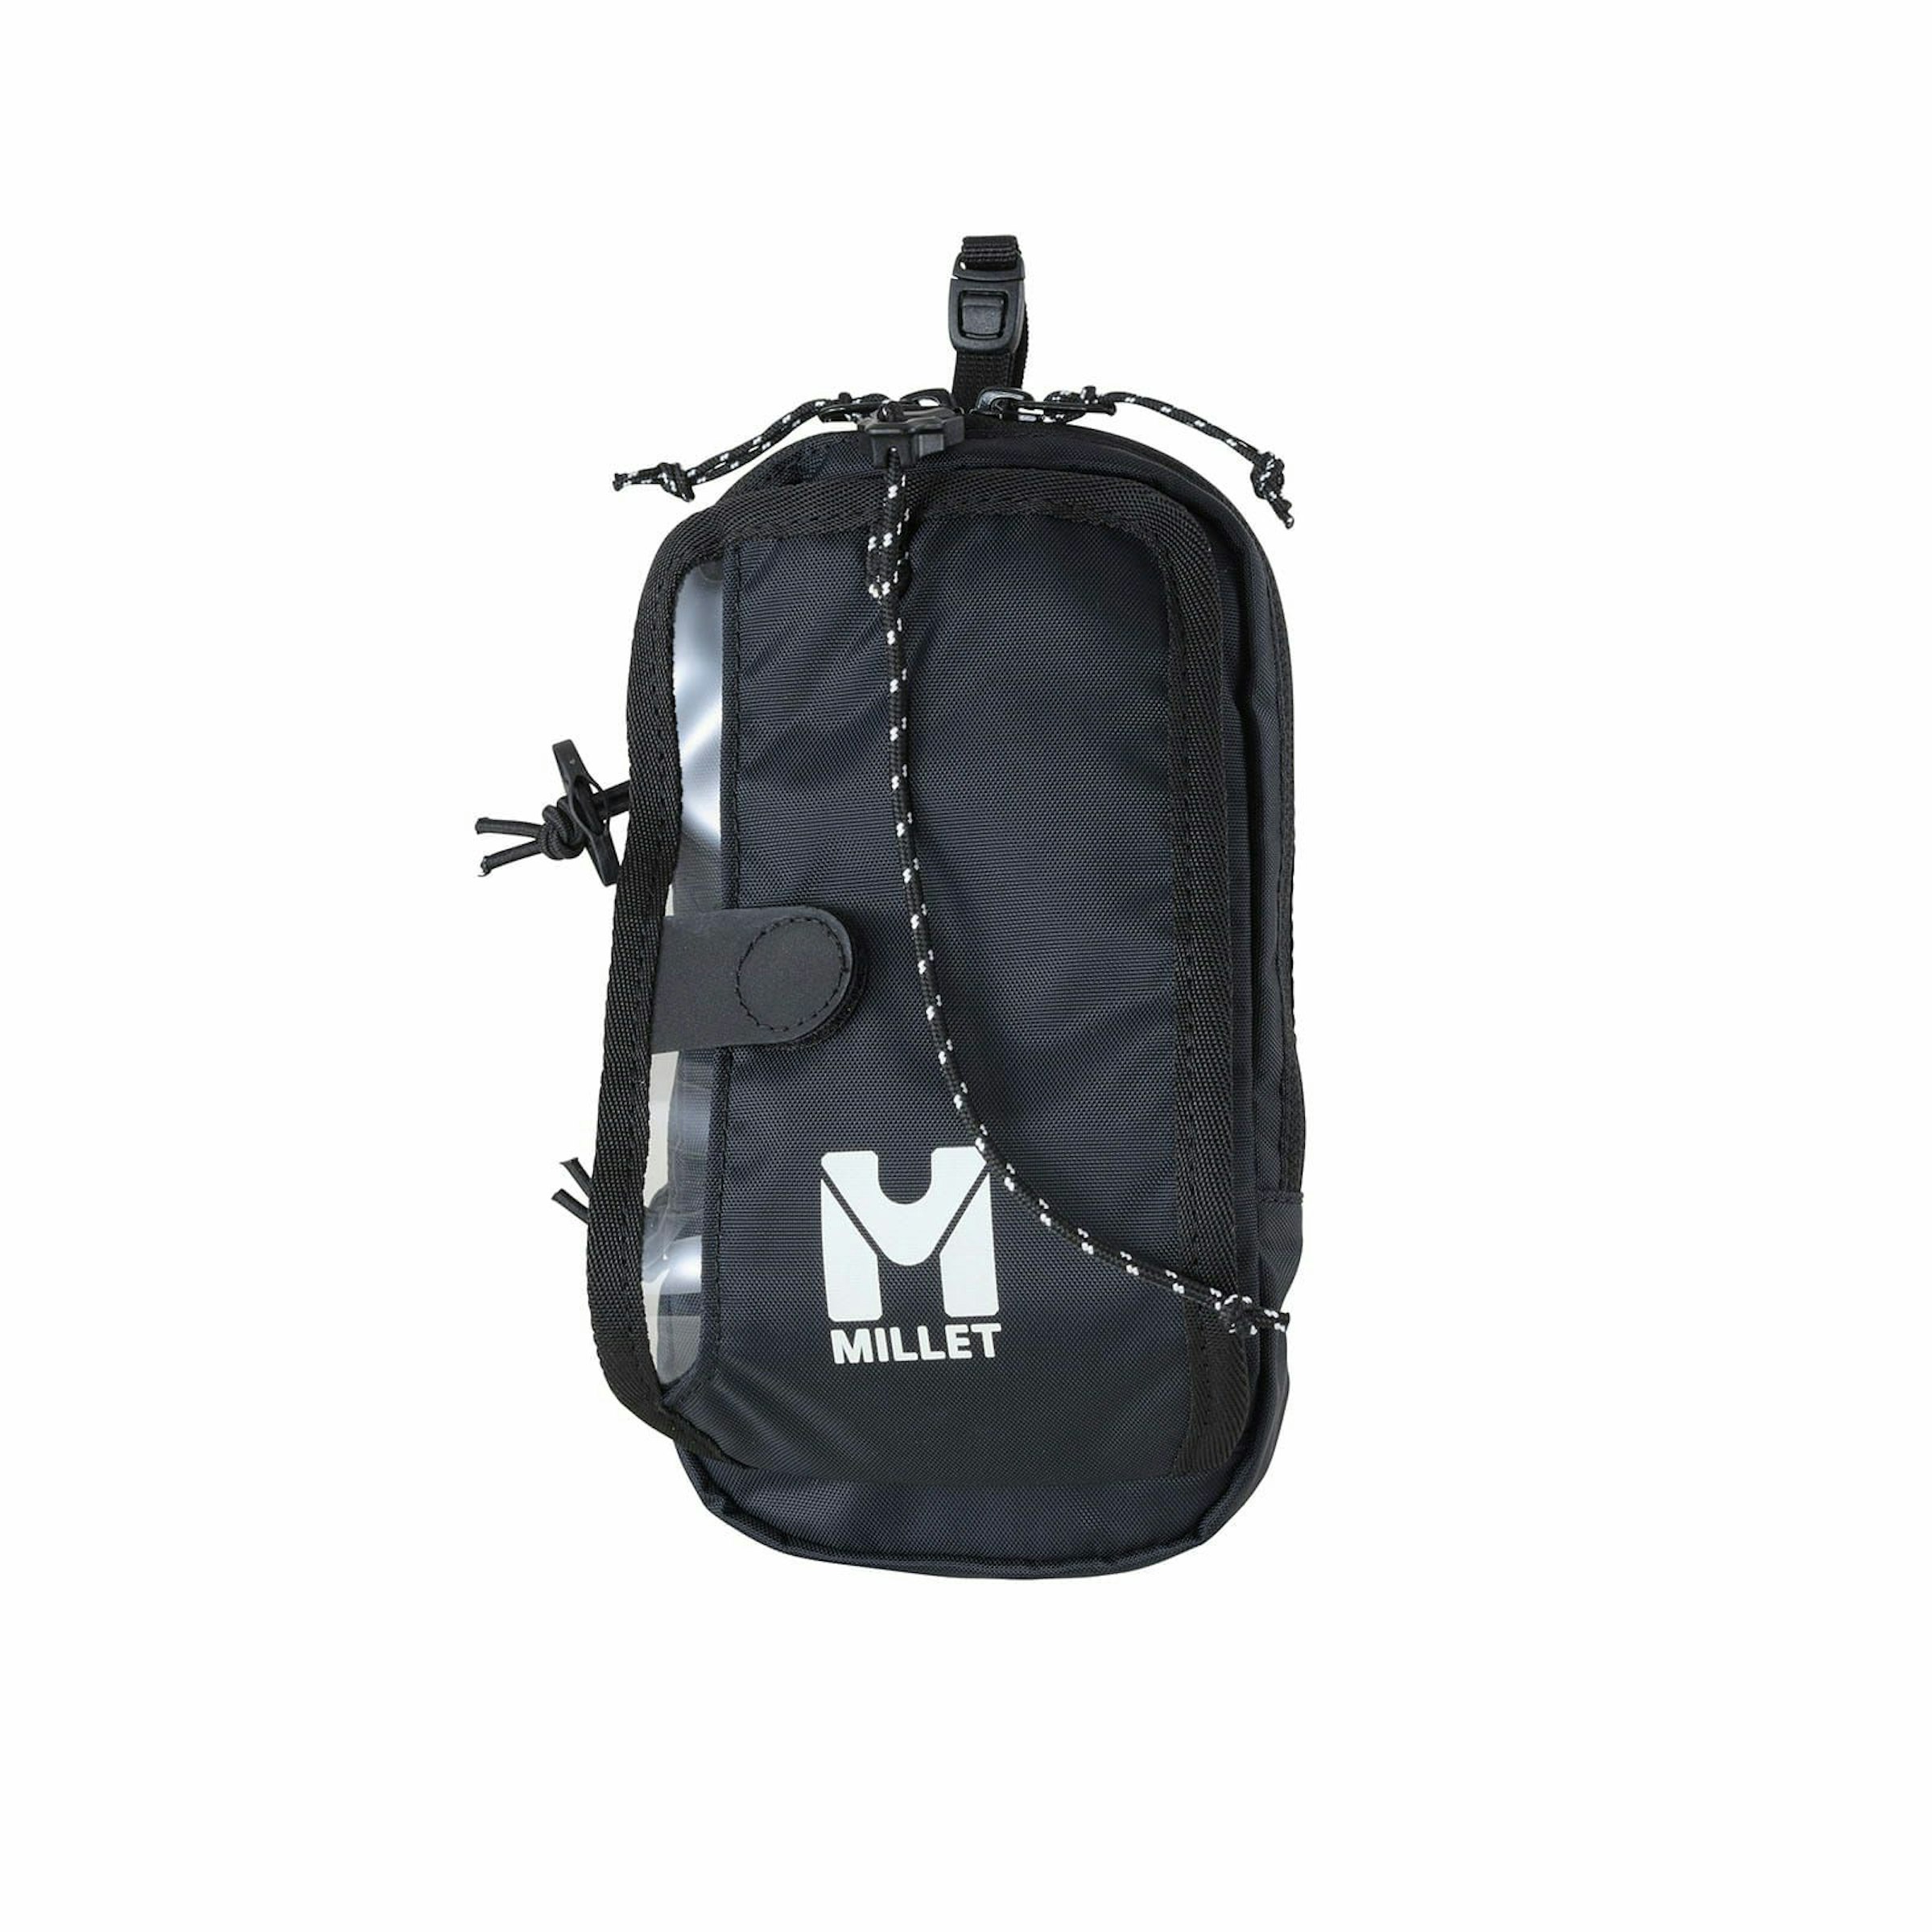 KHUMBU MOUNTAIN CRUISE POUCH 3,080 yen (tax included) Weight 100g available in three colors: COFFEE, FOGGY DEW, JET BLACK  